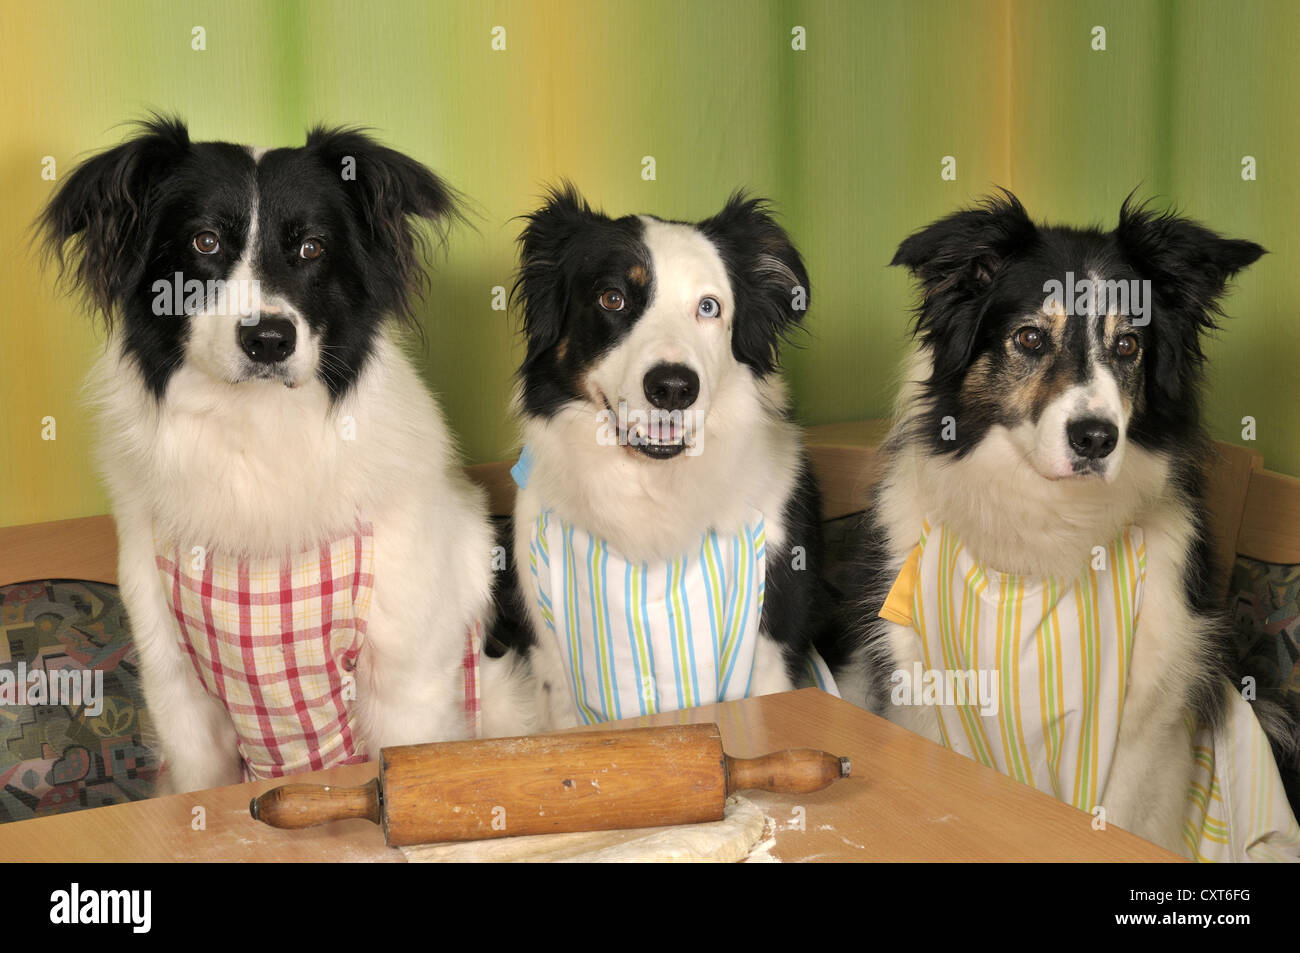 Three Border Collies making biscuits Stock Photo